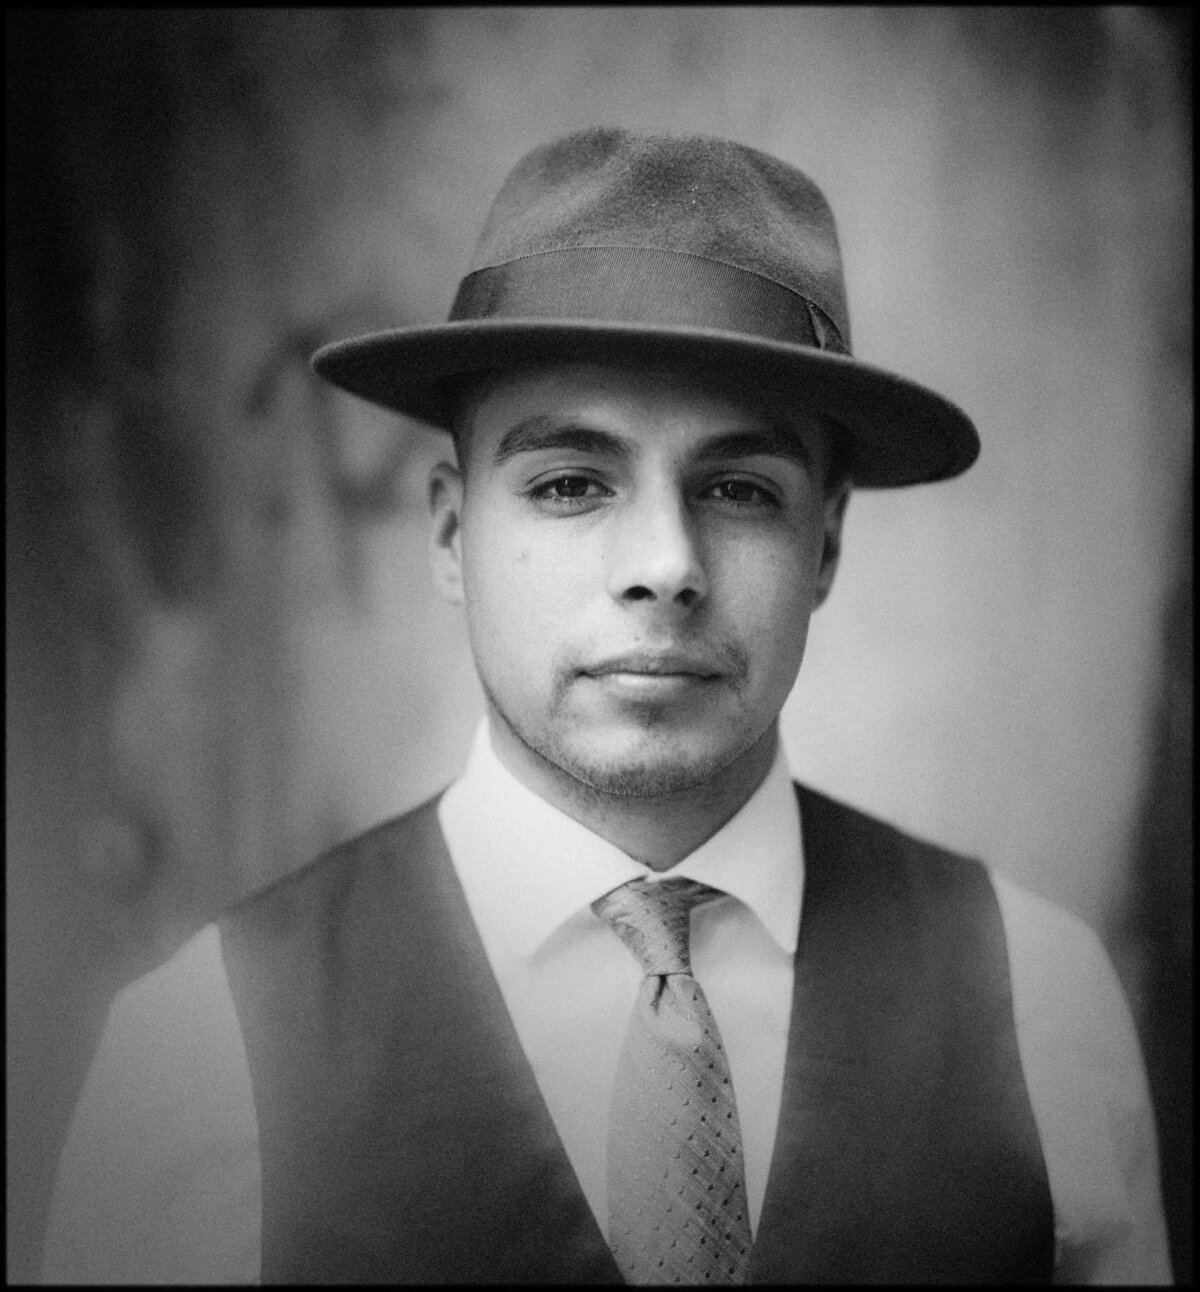 A man in a hat and suit with a small smile